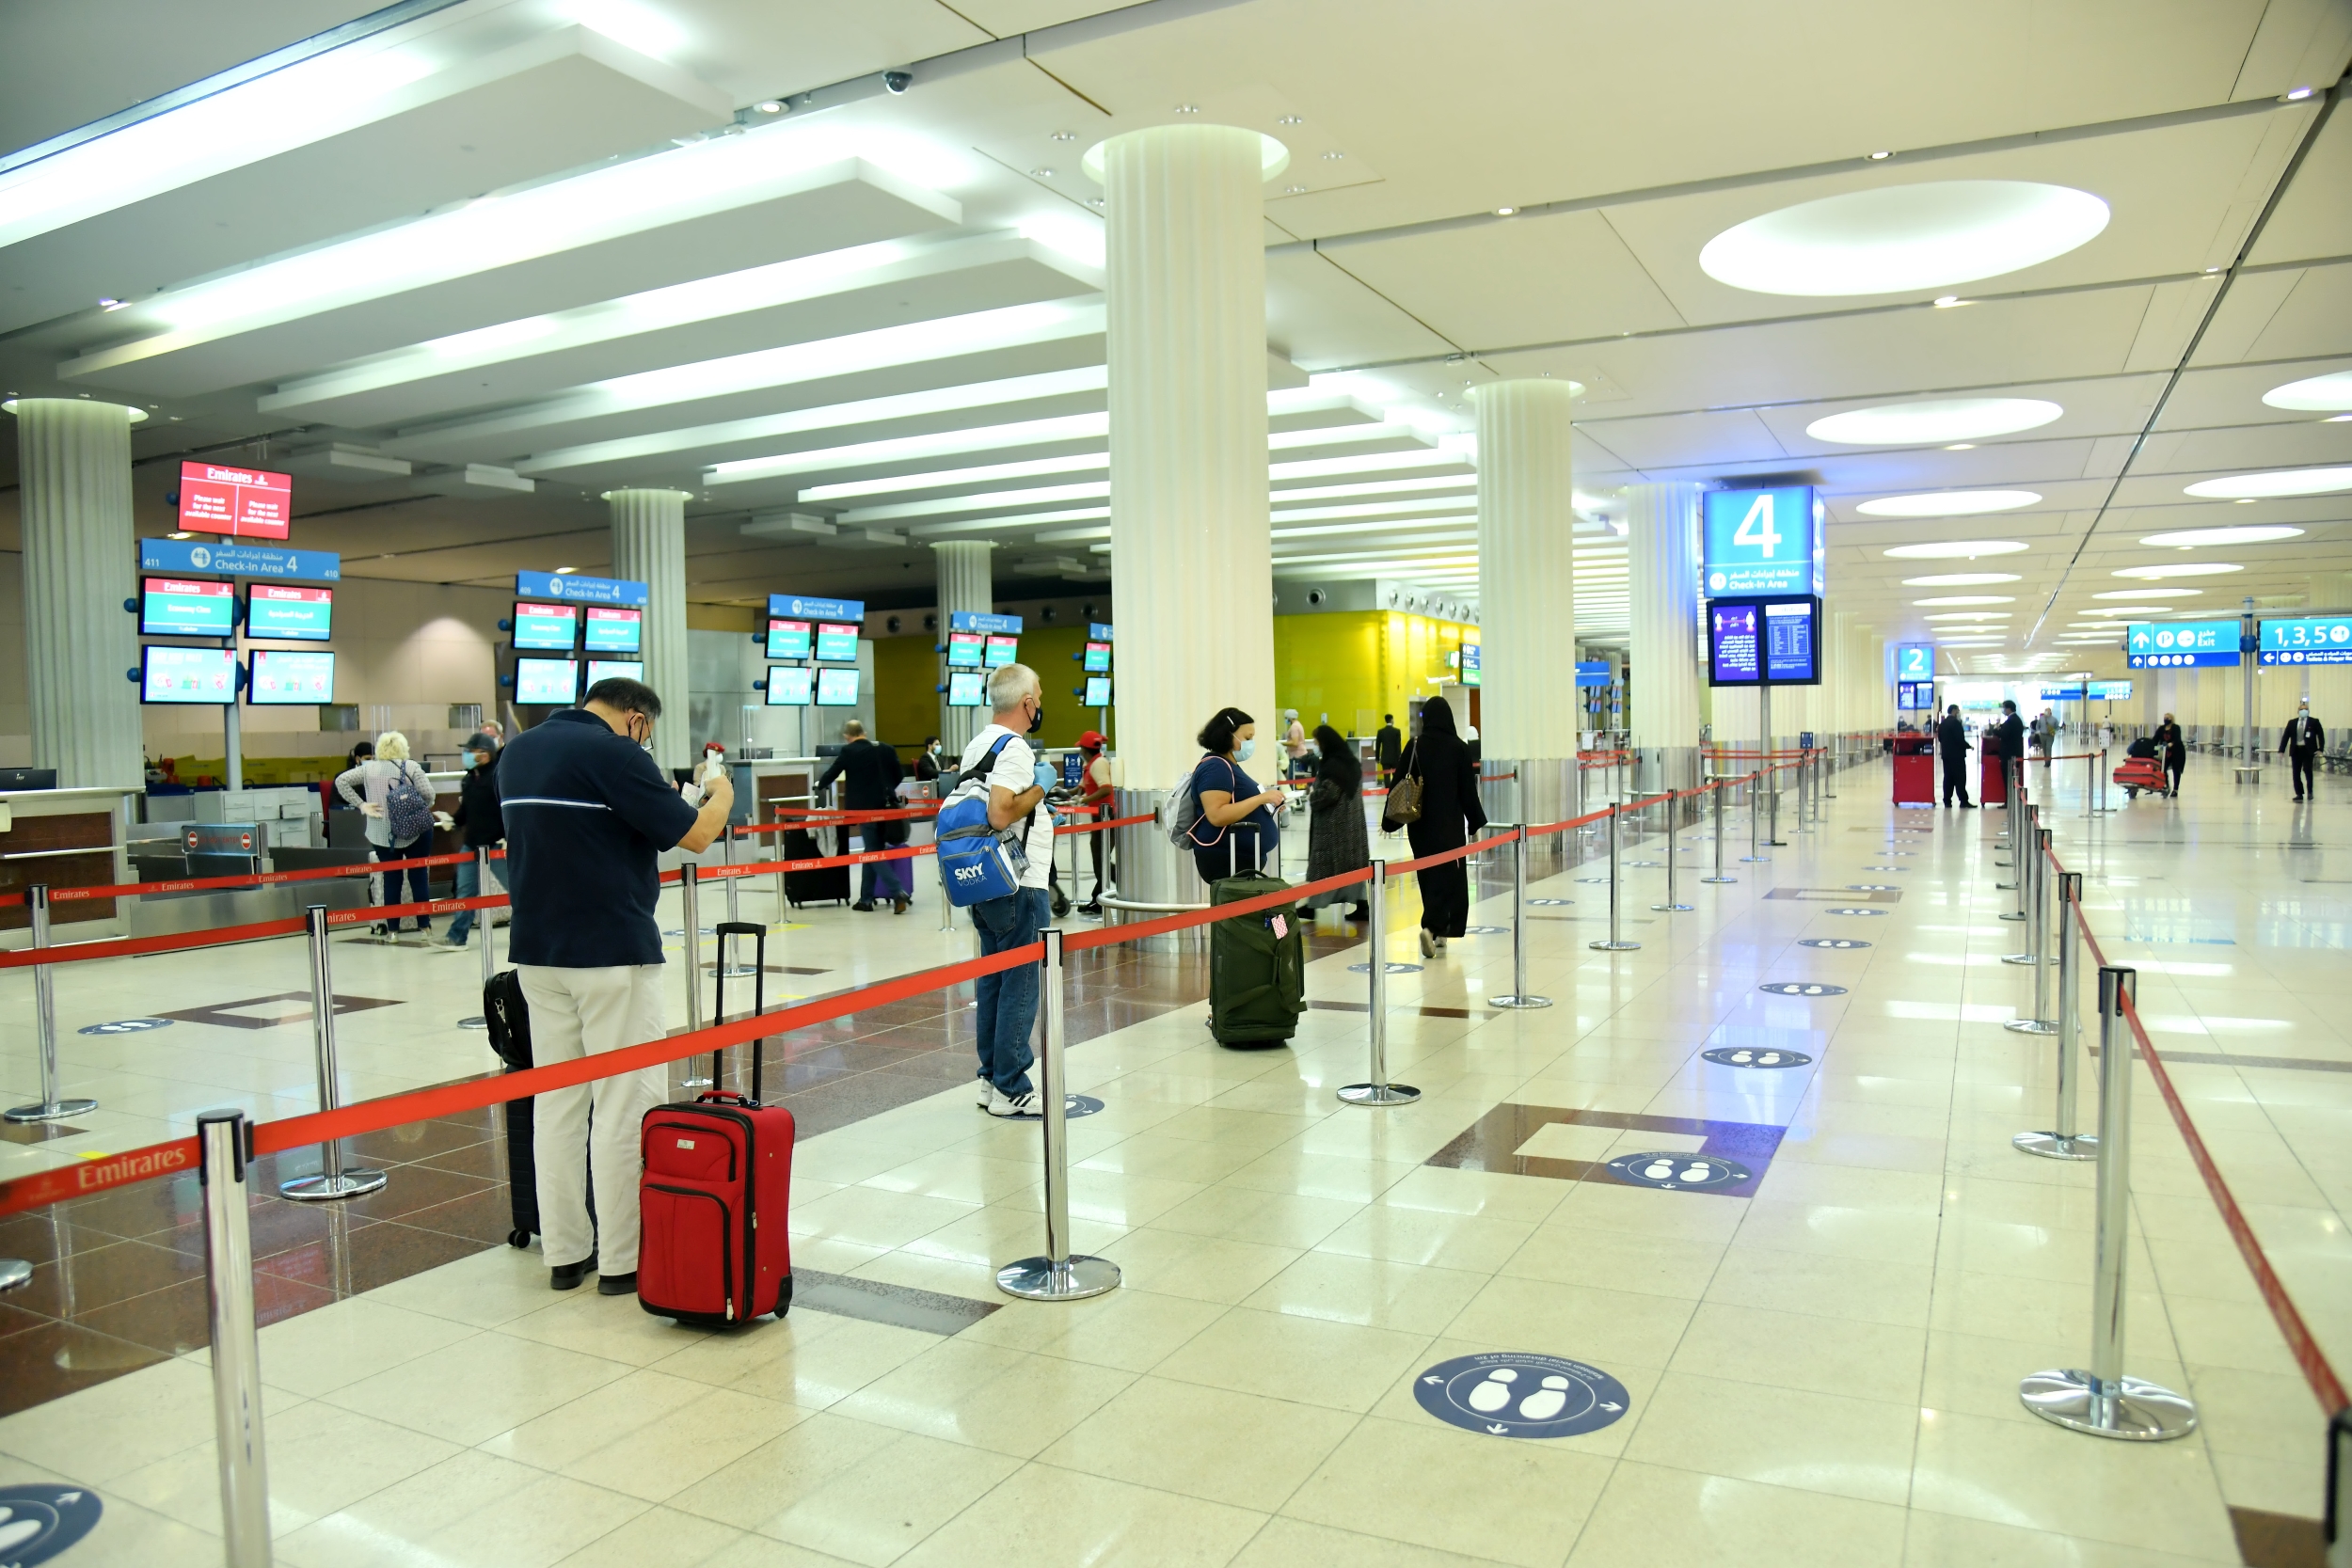 Covid-19: Dubai Airports CEO expects 18-24 months recovery timeframe